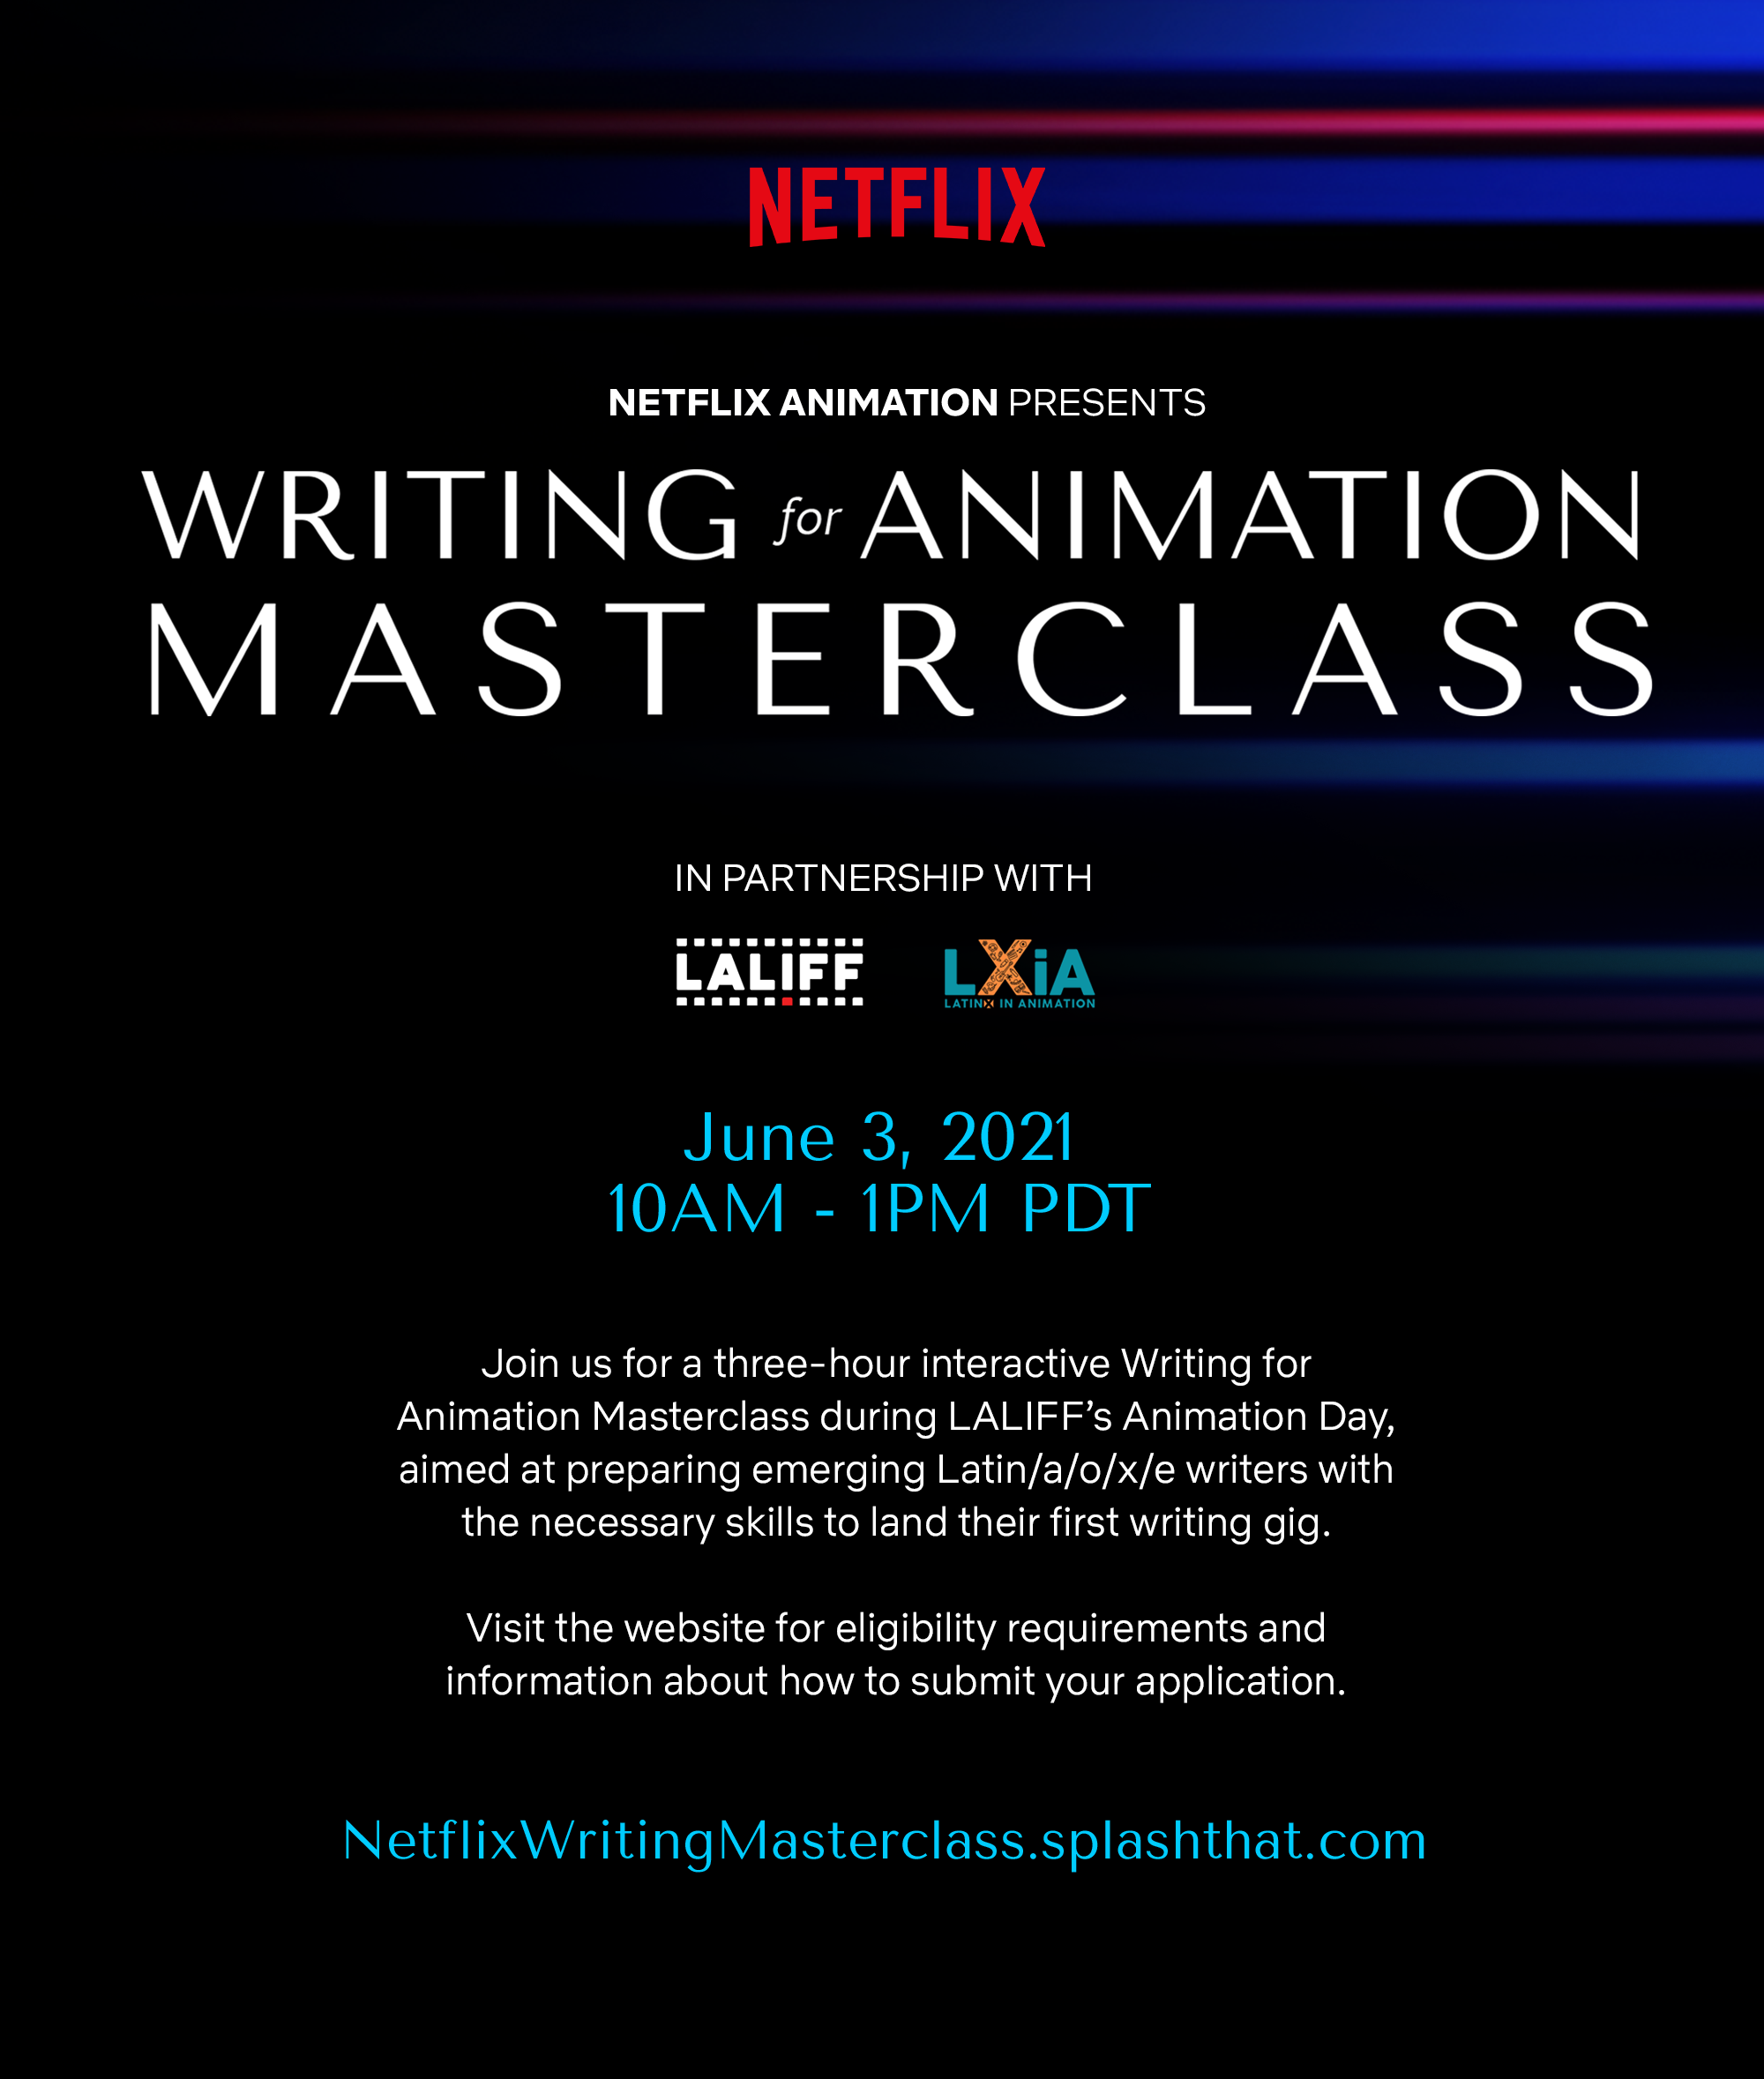 Writing for Animation Masterclass